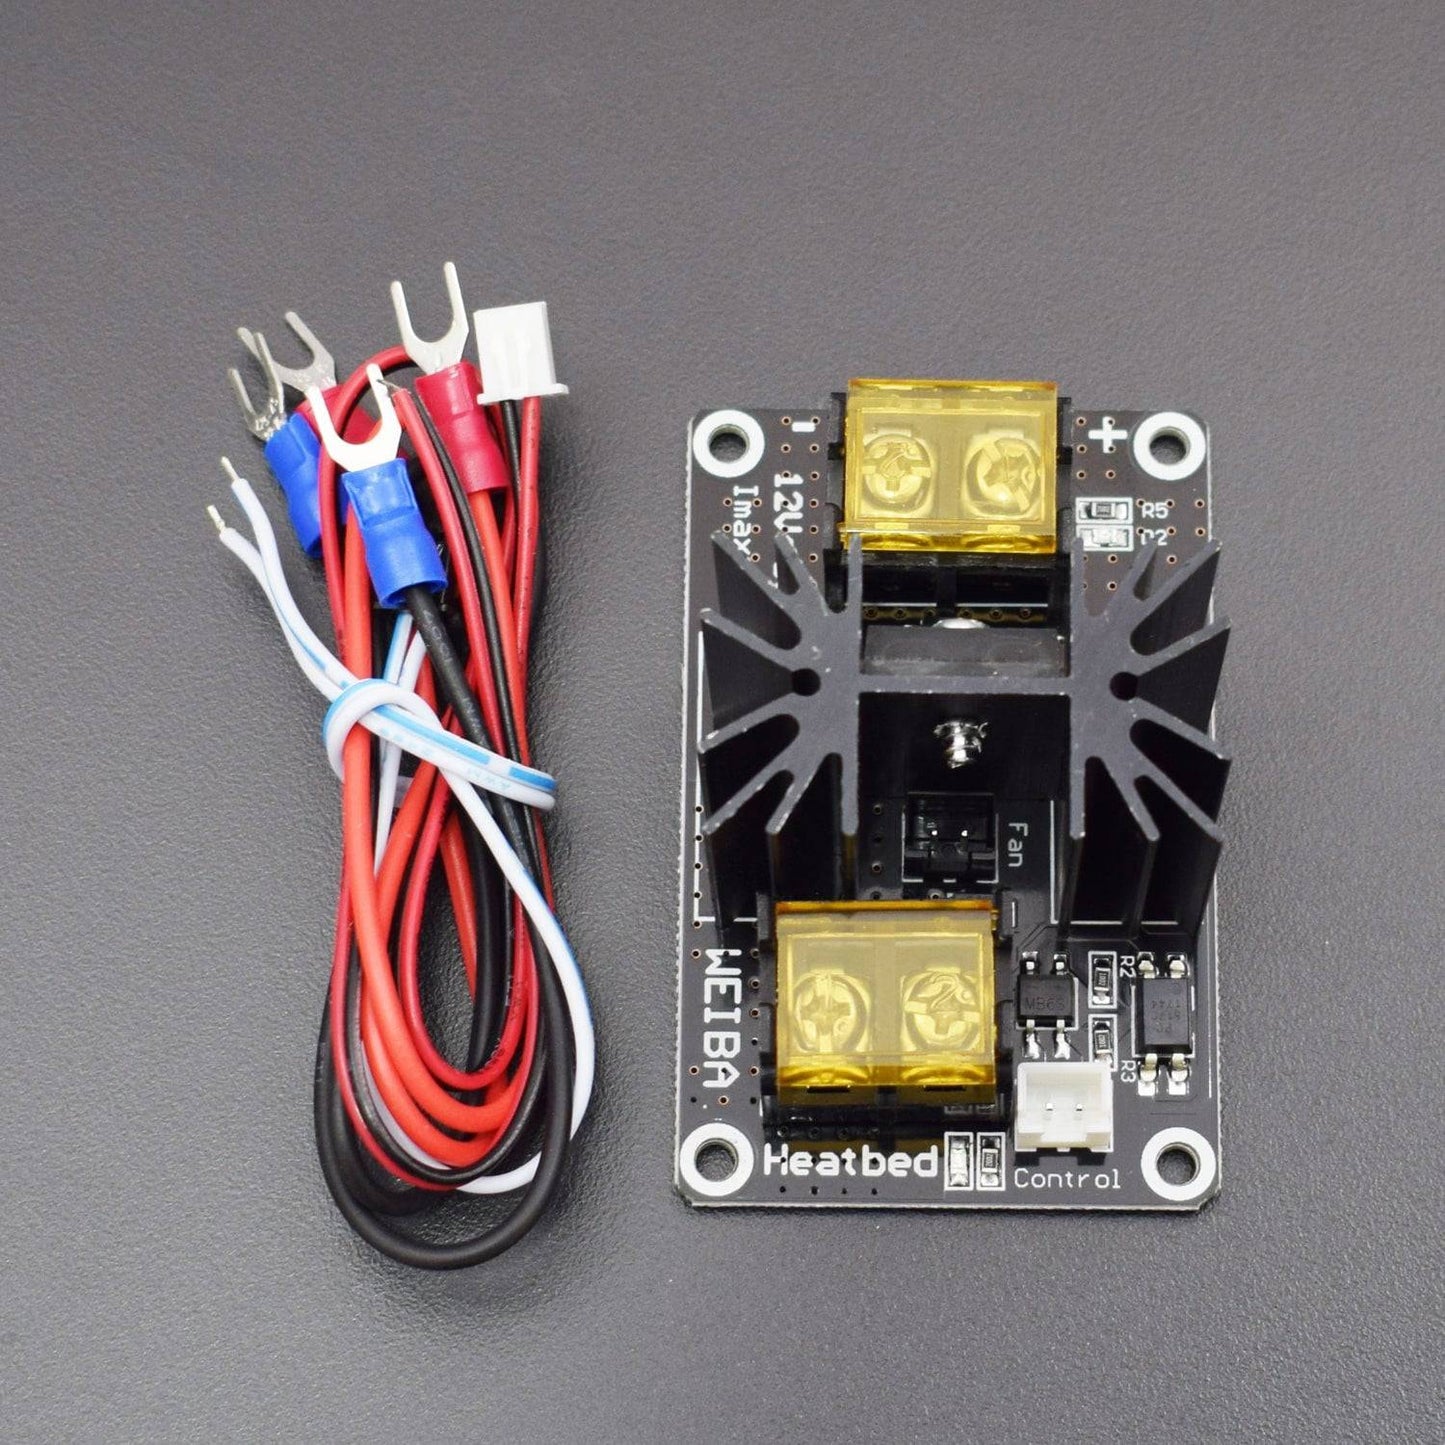 General Add-on Hot Bed 12V-50V Power Module Expansion Board for 3D Printer - RS1081 - REES52